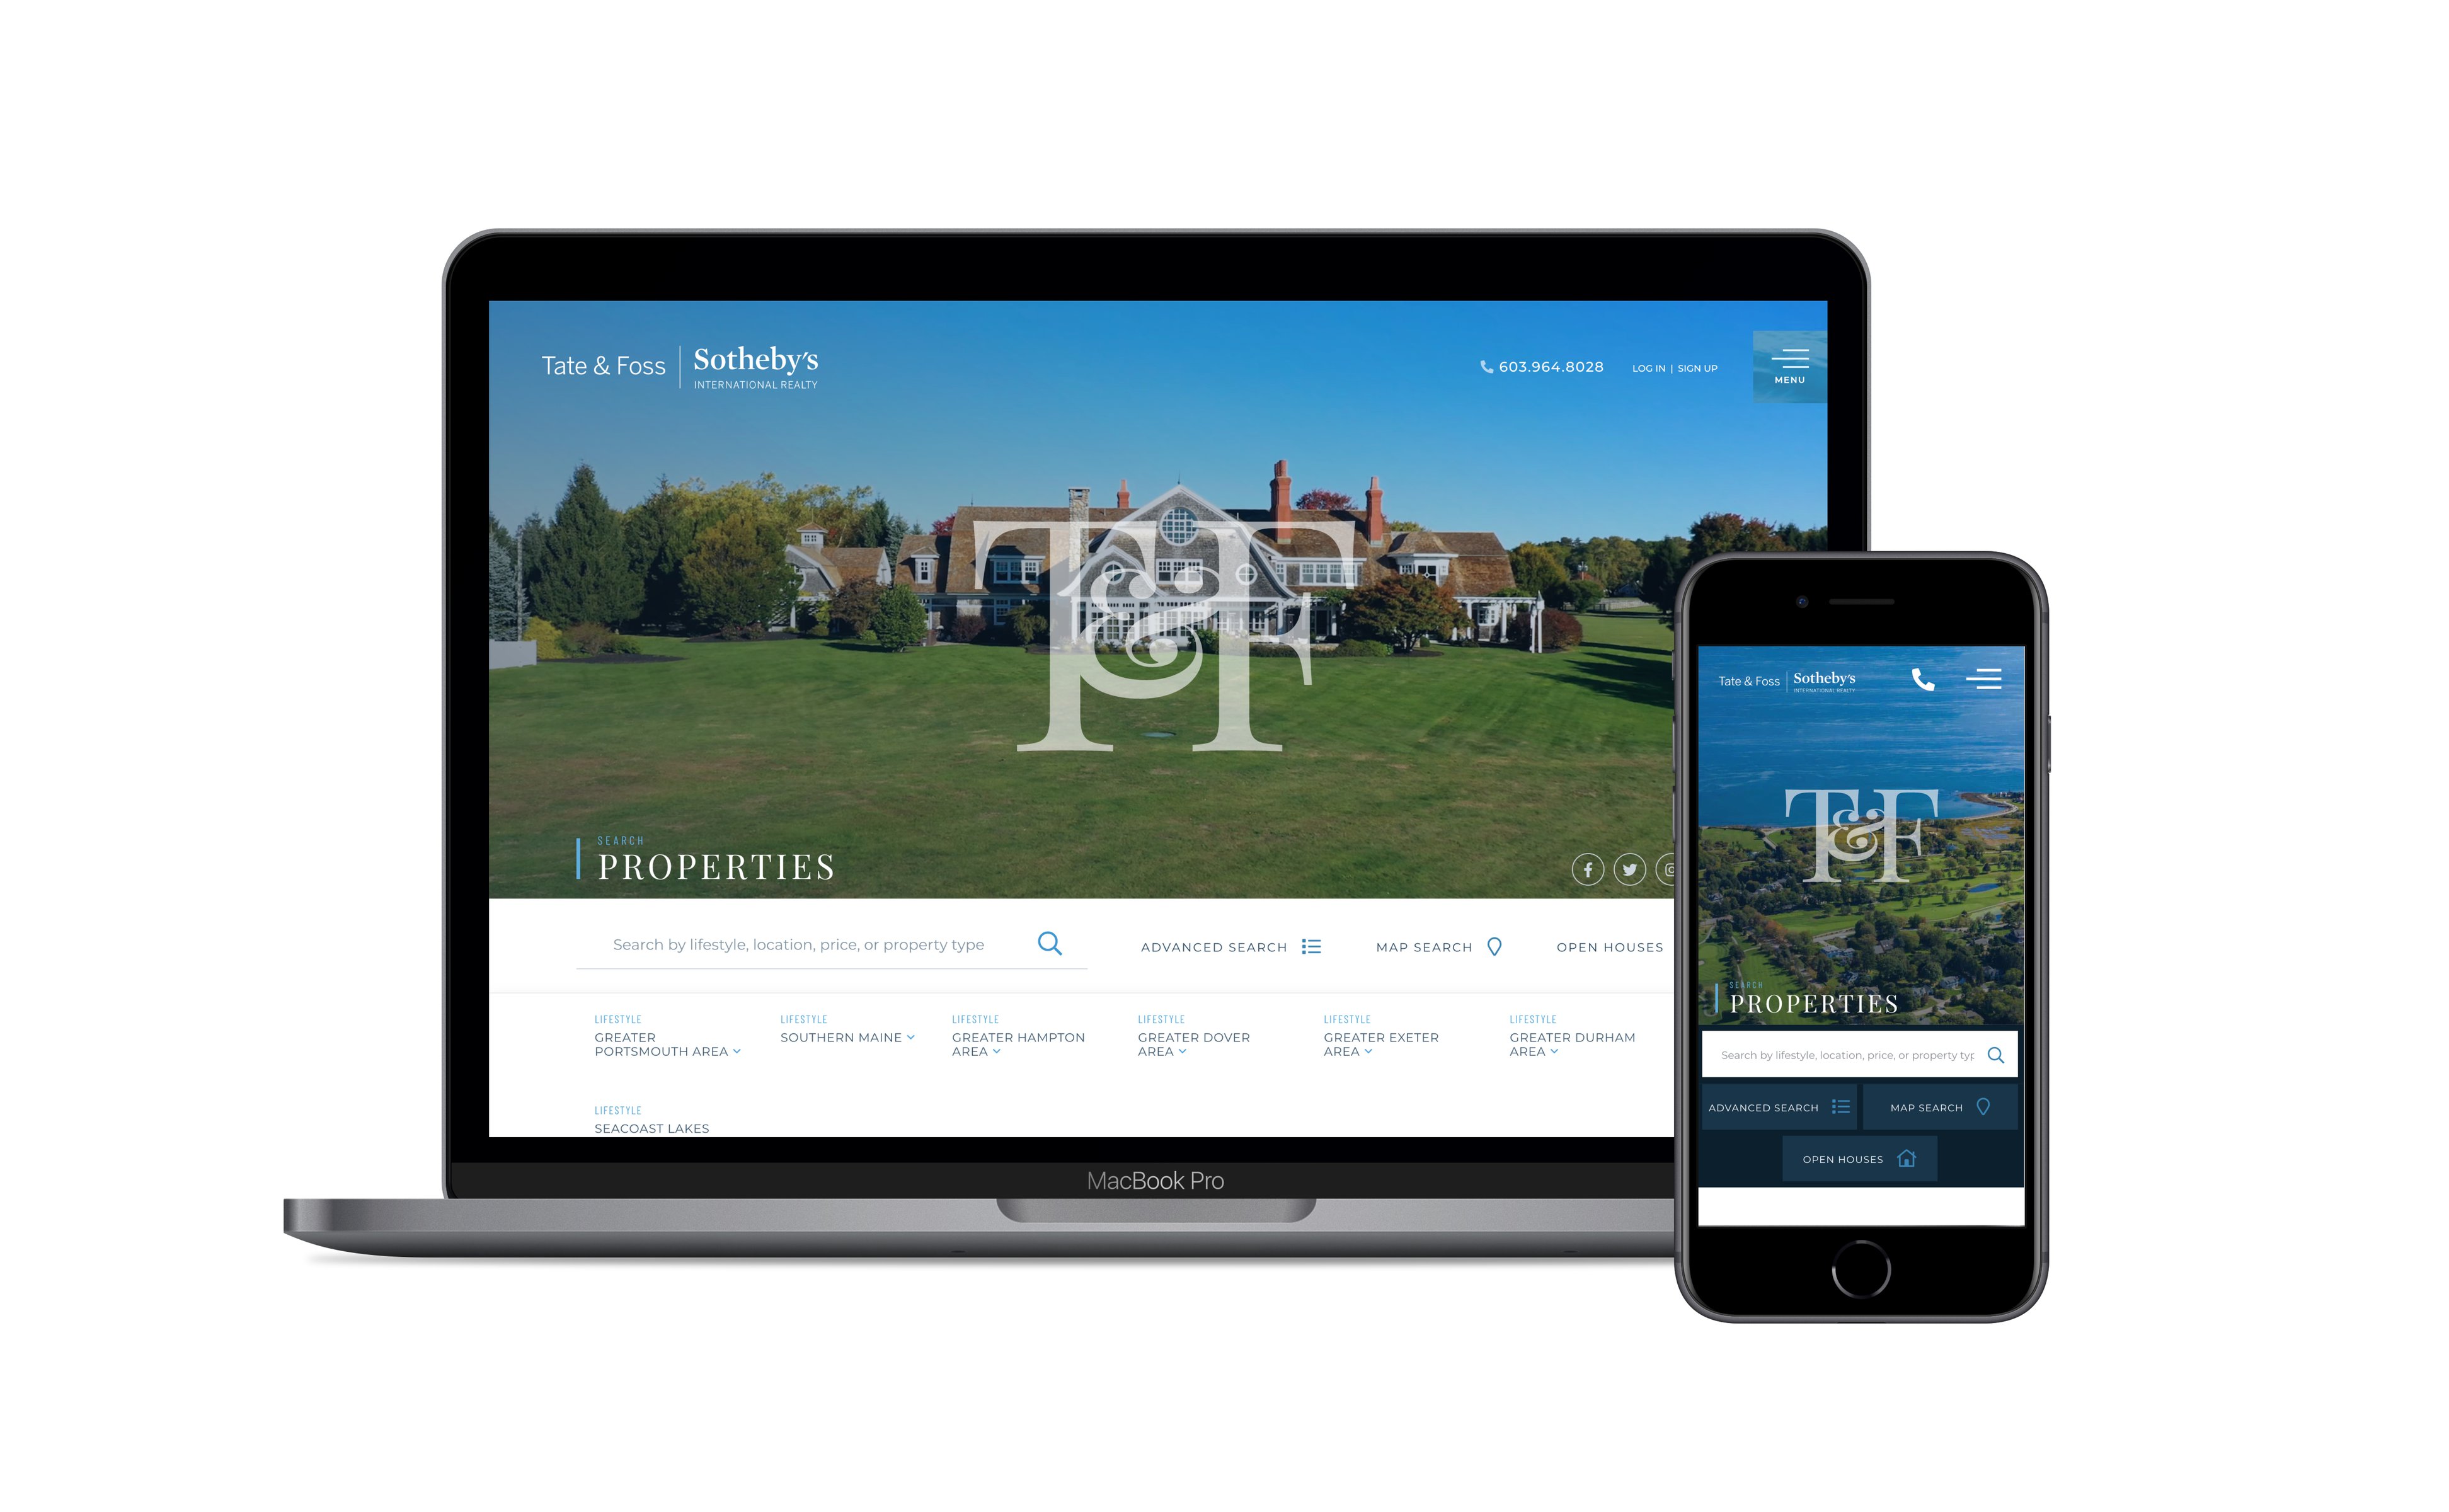 tate and foss sothebys international realty website homepage